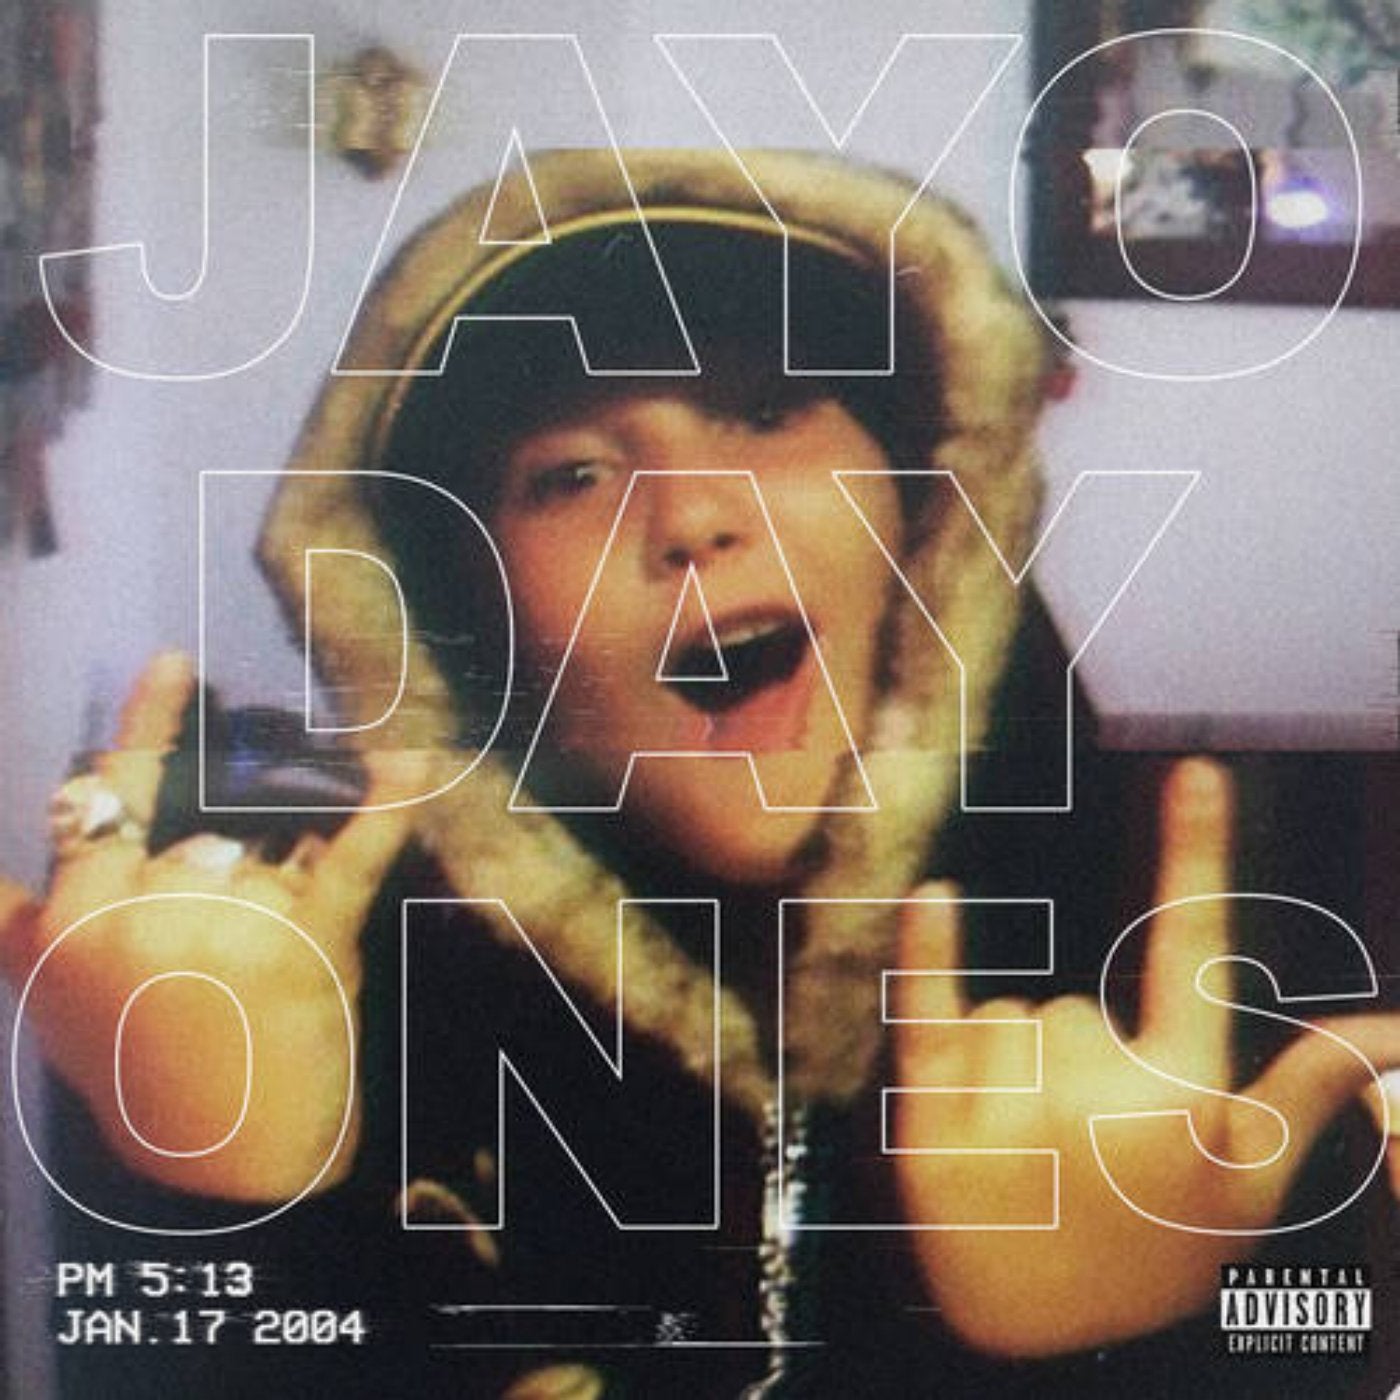 JayO - Songs, Events and Music Stats